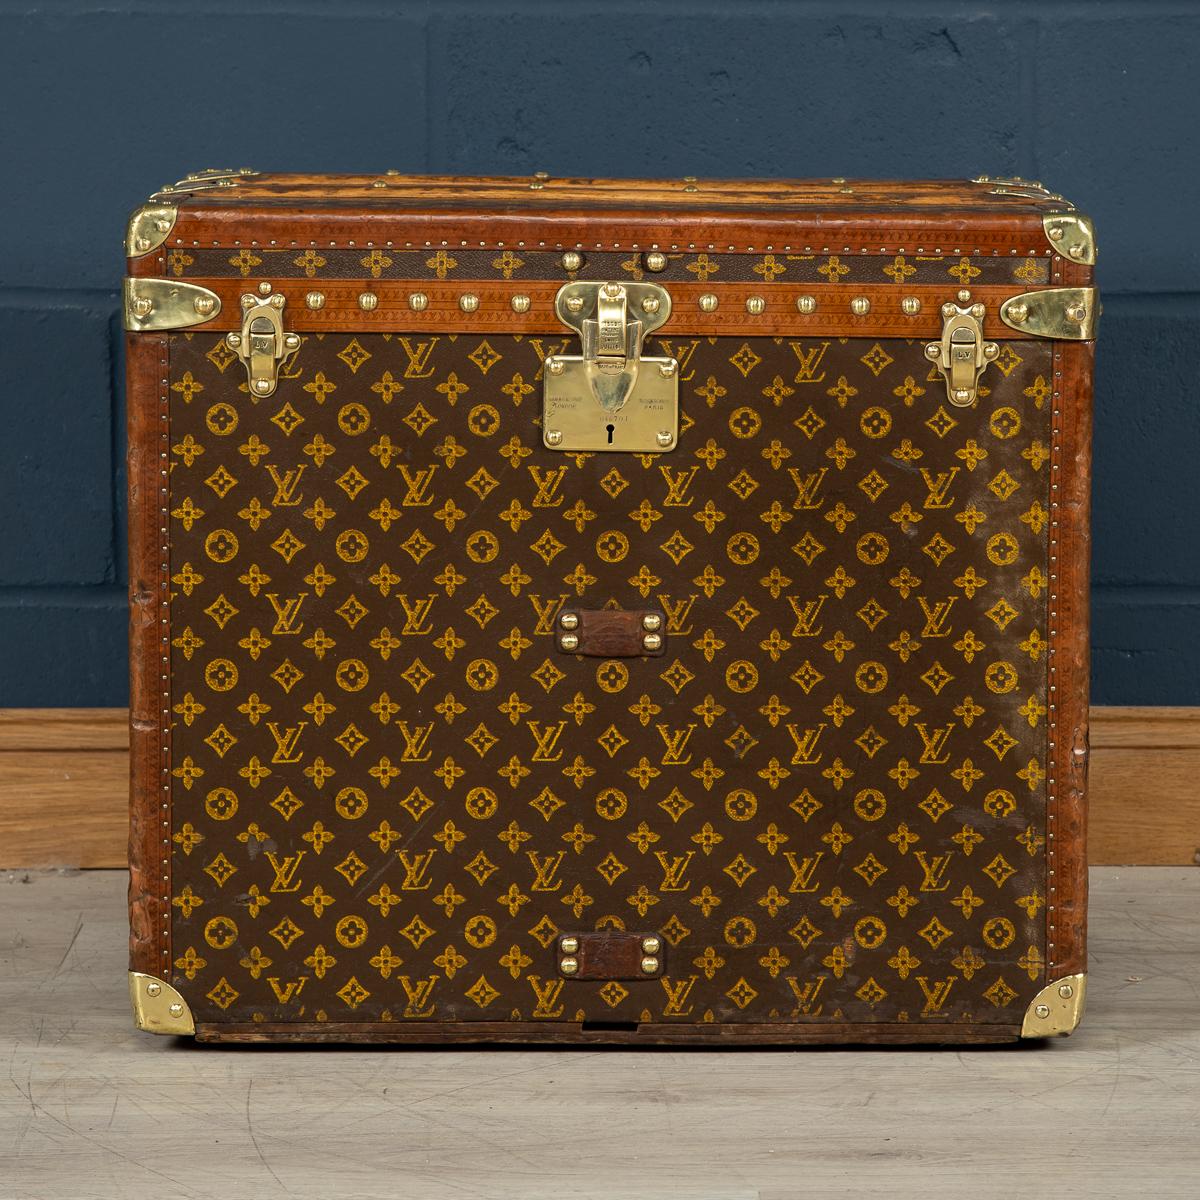 A stunning Louis Vuitton hat trunk in stencilled monogrammed canvas with lozine and brass trim, made in France, circa 1930. This trunk is a must have item for any elite traveler harking back to times of passenger ships and 1st class travel of bygone